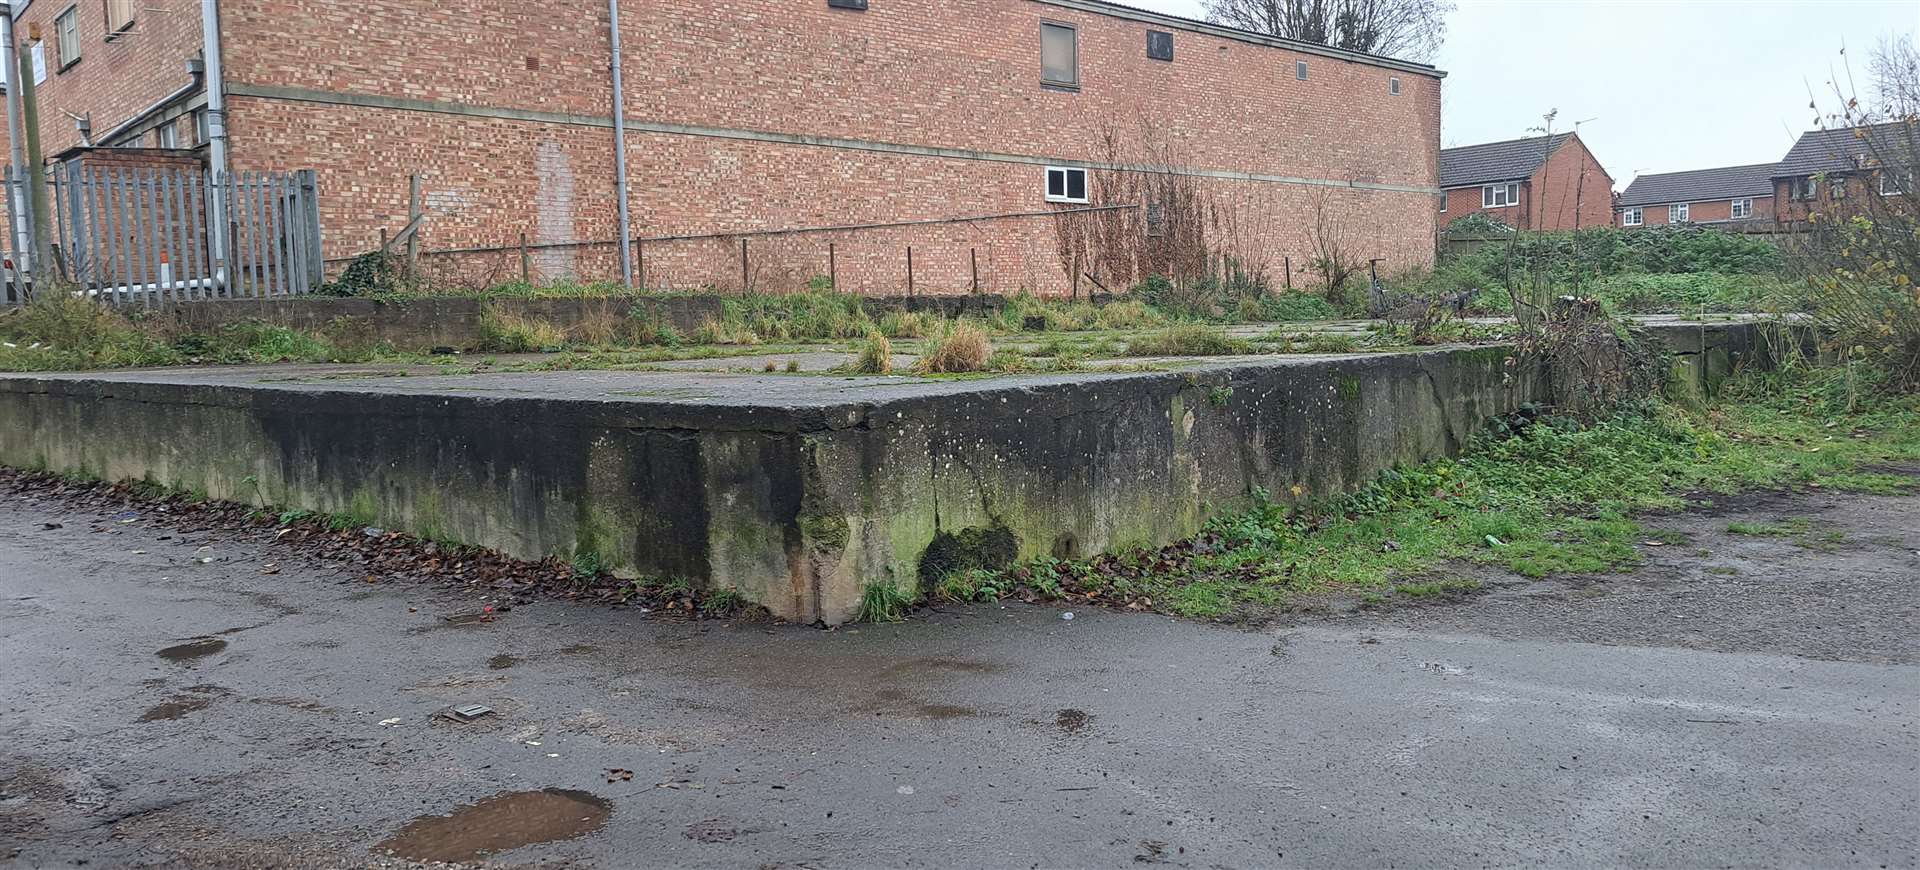 The concrete slab in Wharf Road - unused for 30 years